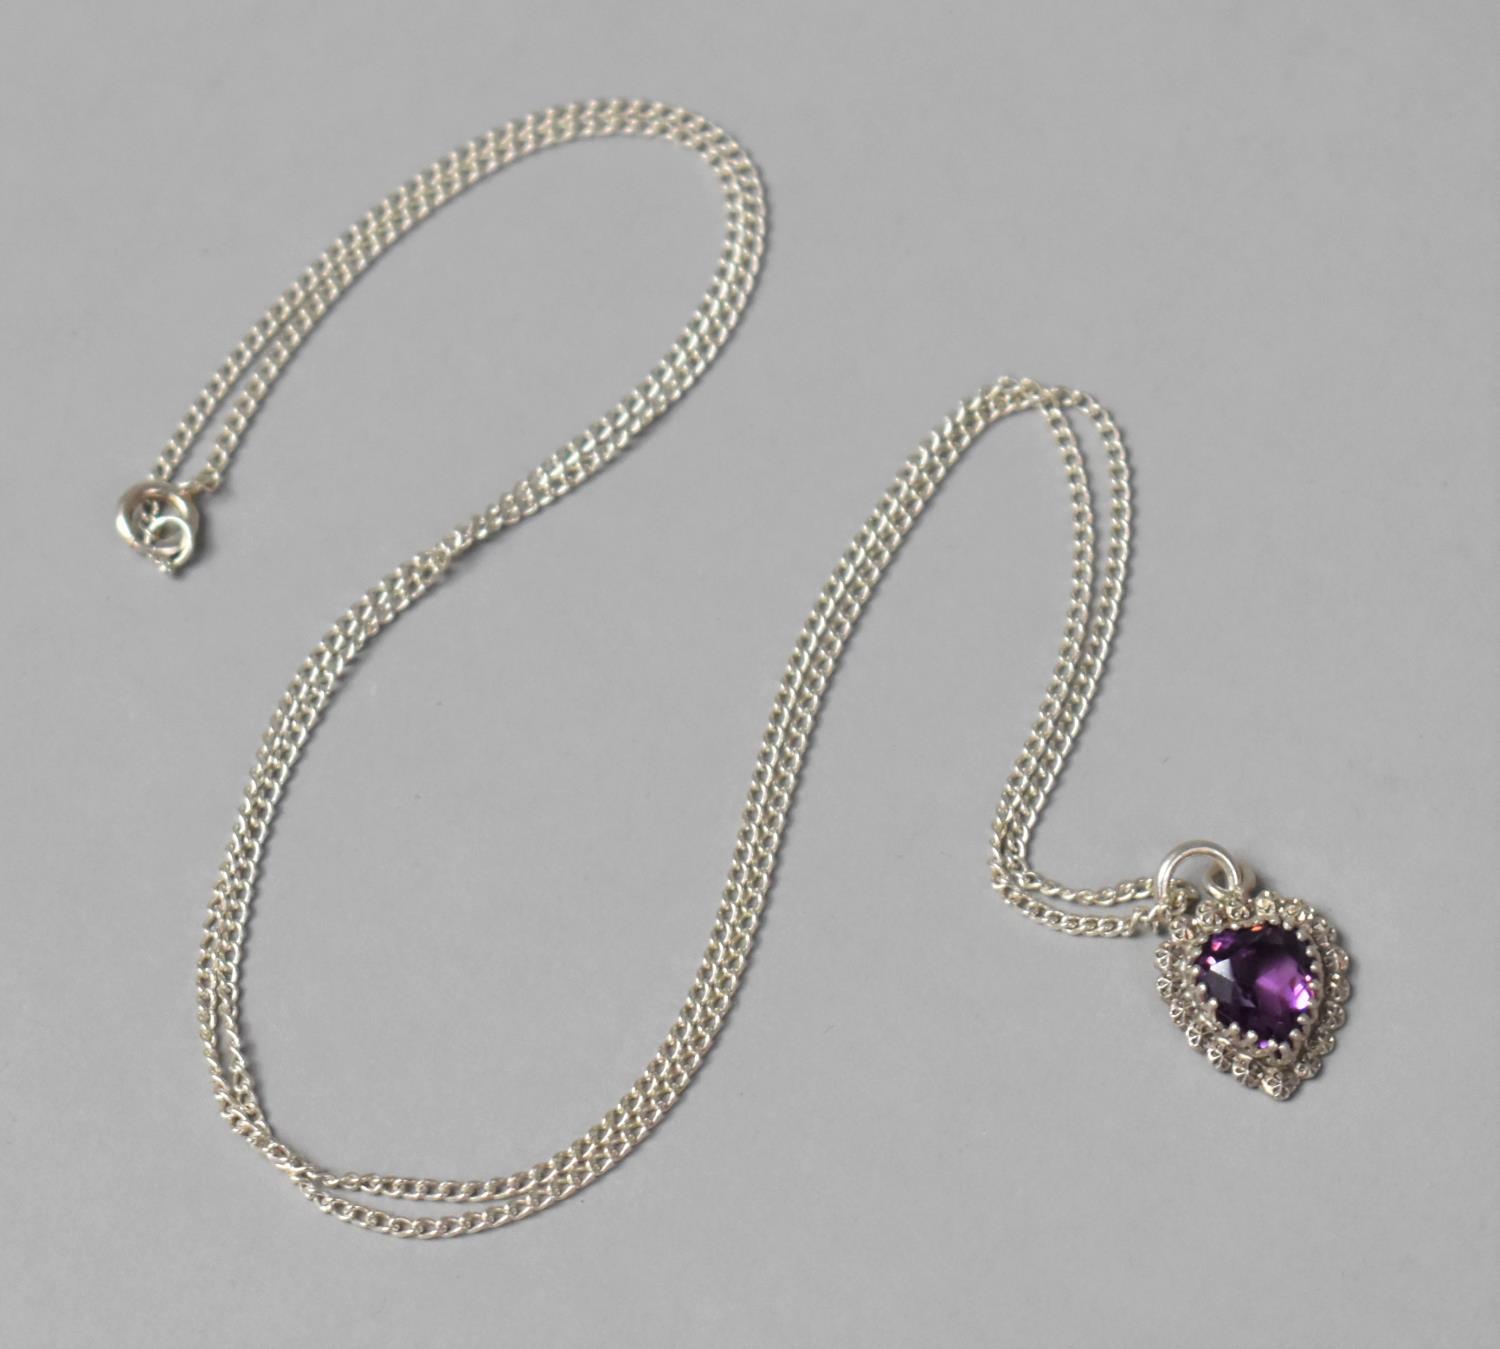 A Charles Horner Silver and Amethyst Heart Shaped Pendant on Fine Silver Chain, Hallmarked for